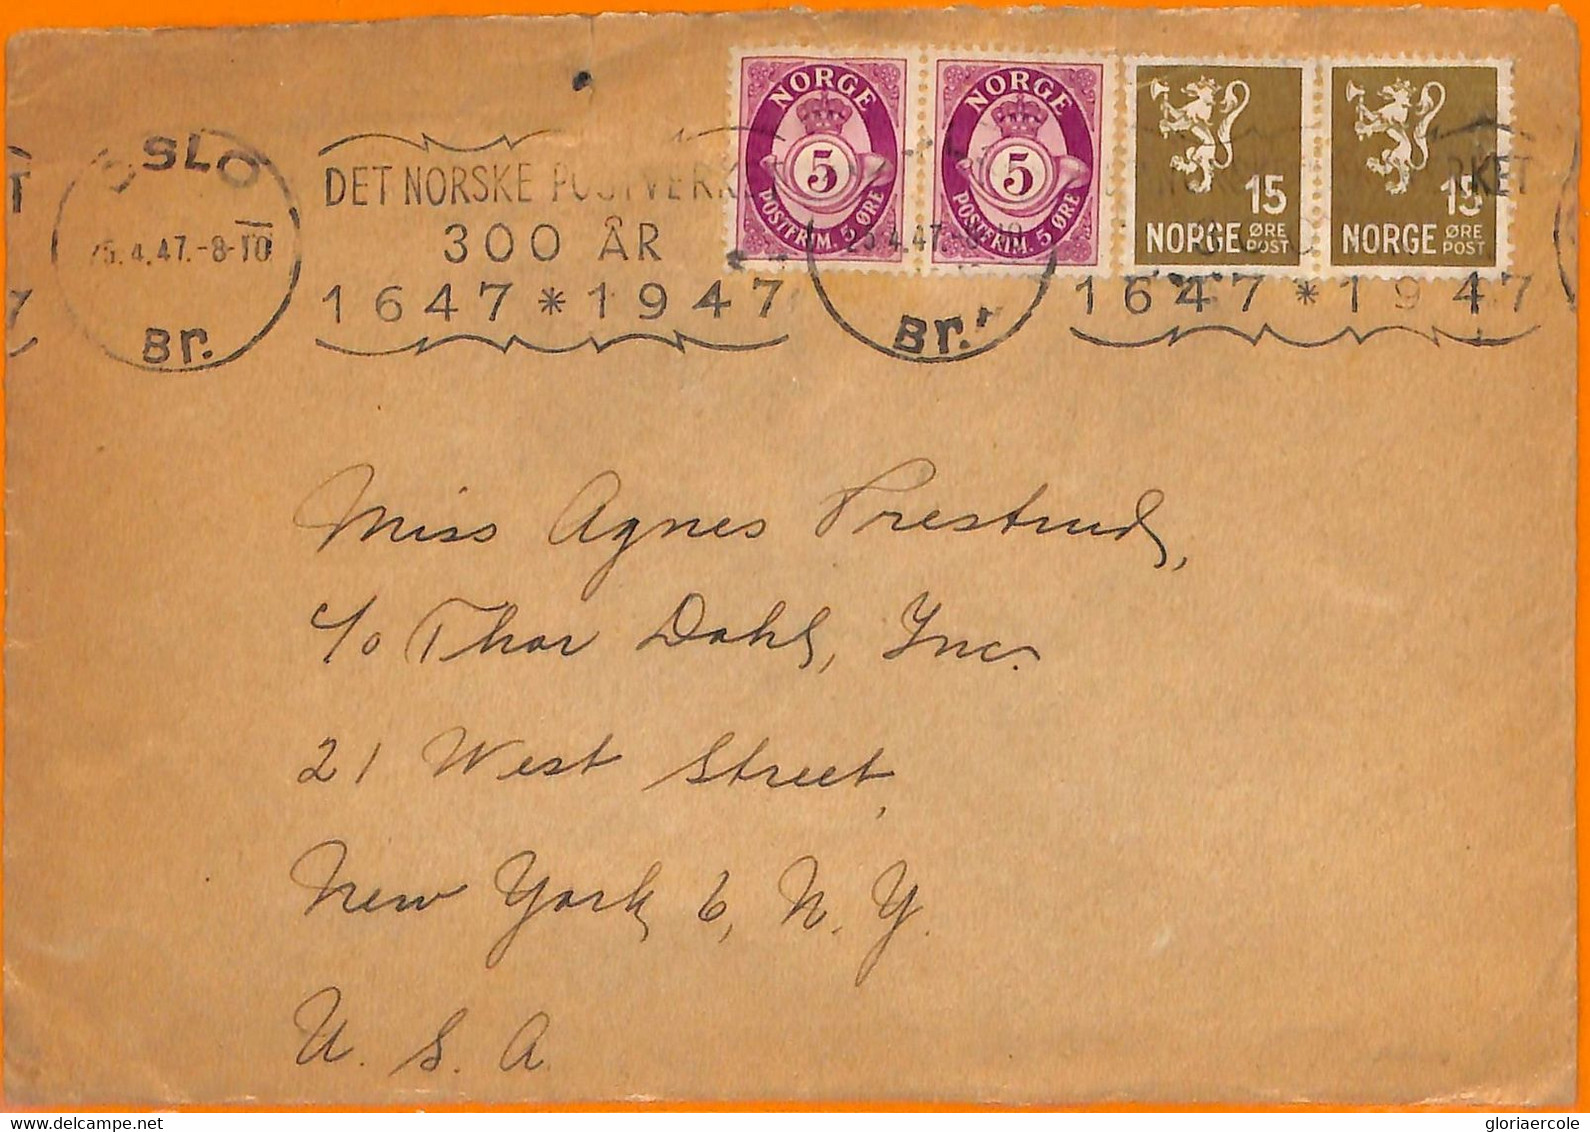 99410 - NORWAY - Postal History -  Cover To The USA 1947 - Lettres & Documents